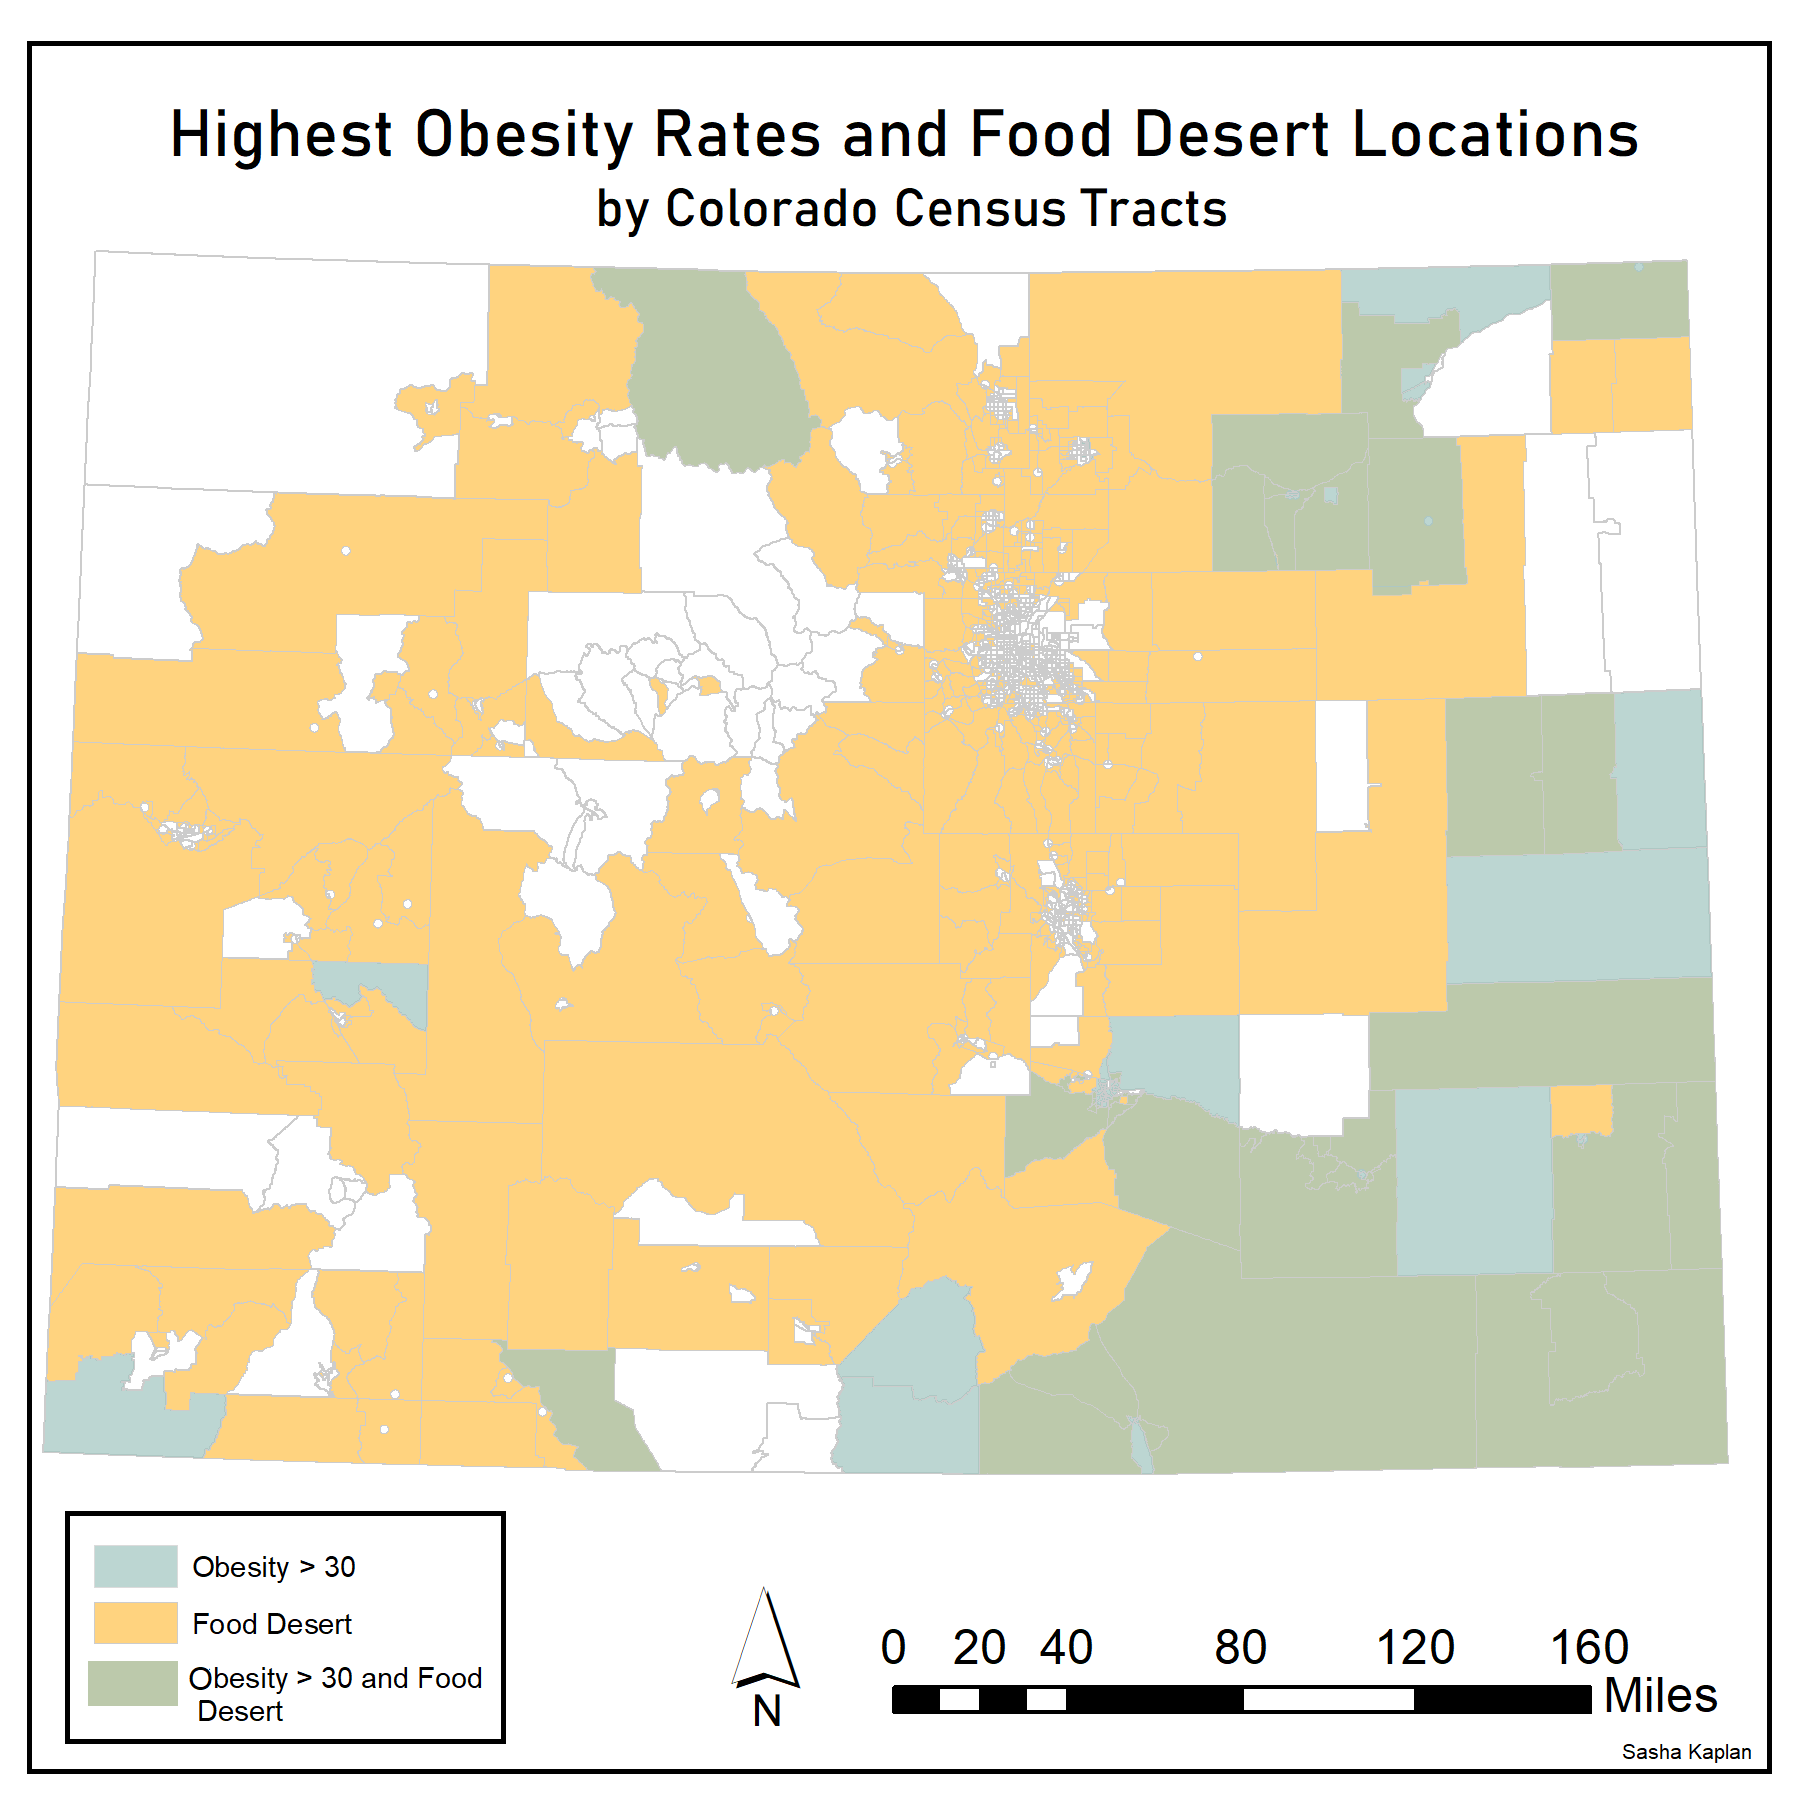 Colorado Food Deserts and Obesity